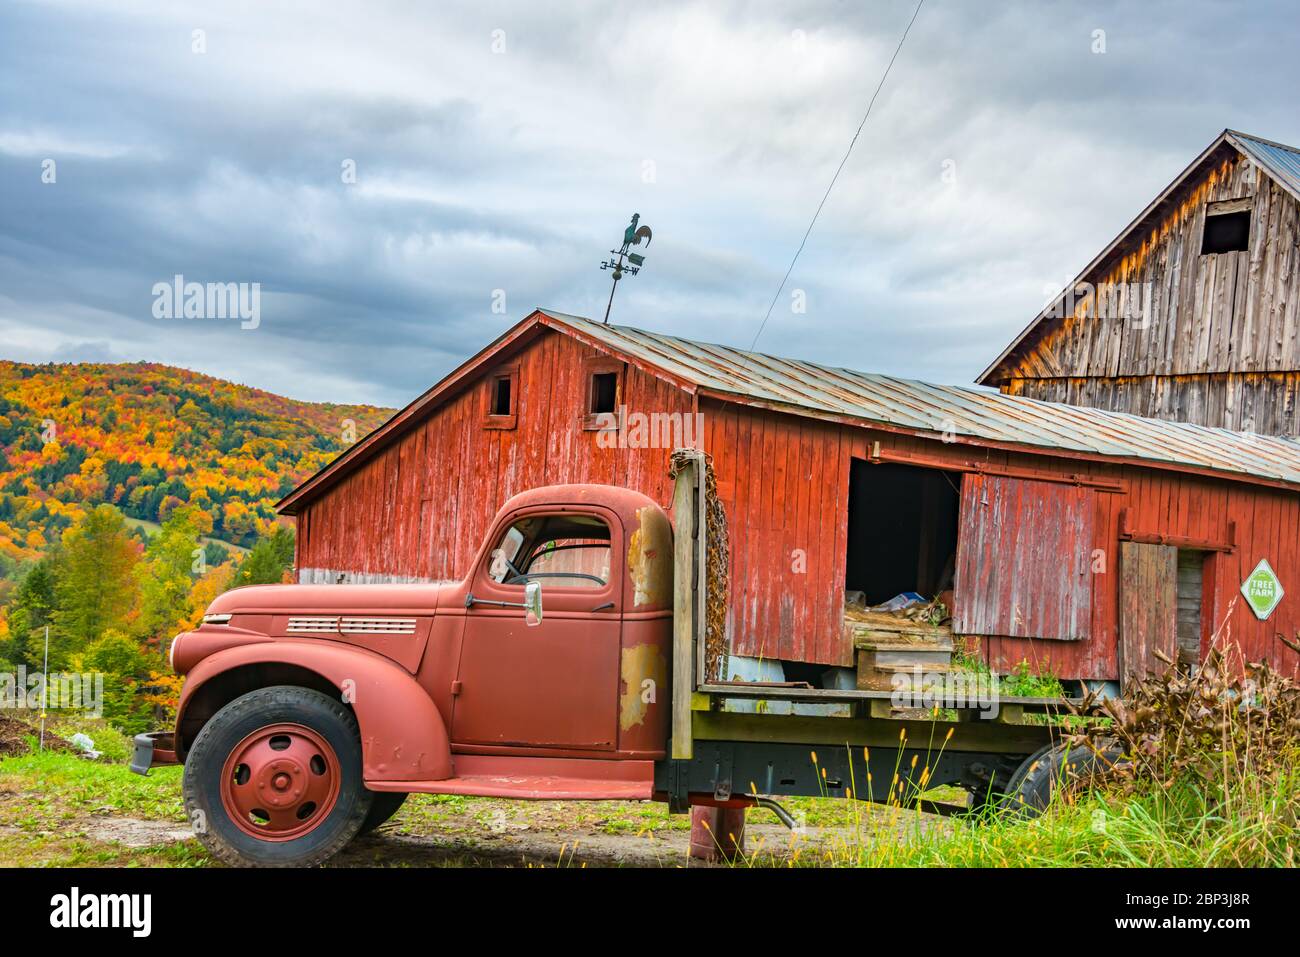 Old Red Truck, Barn, & Fall Foliage on Mountain, Vermont Stock Photo